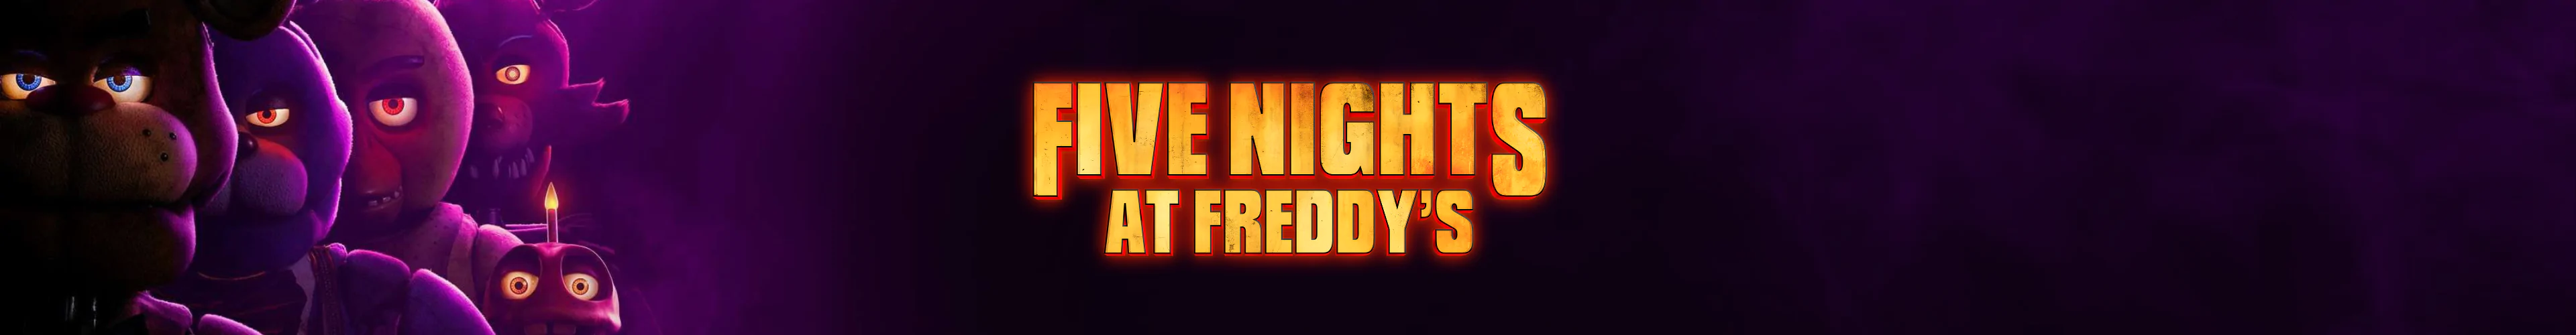 Five Nights at Freddy's advent calendars banner